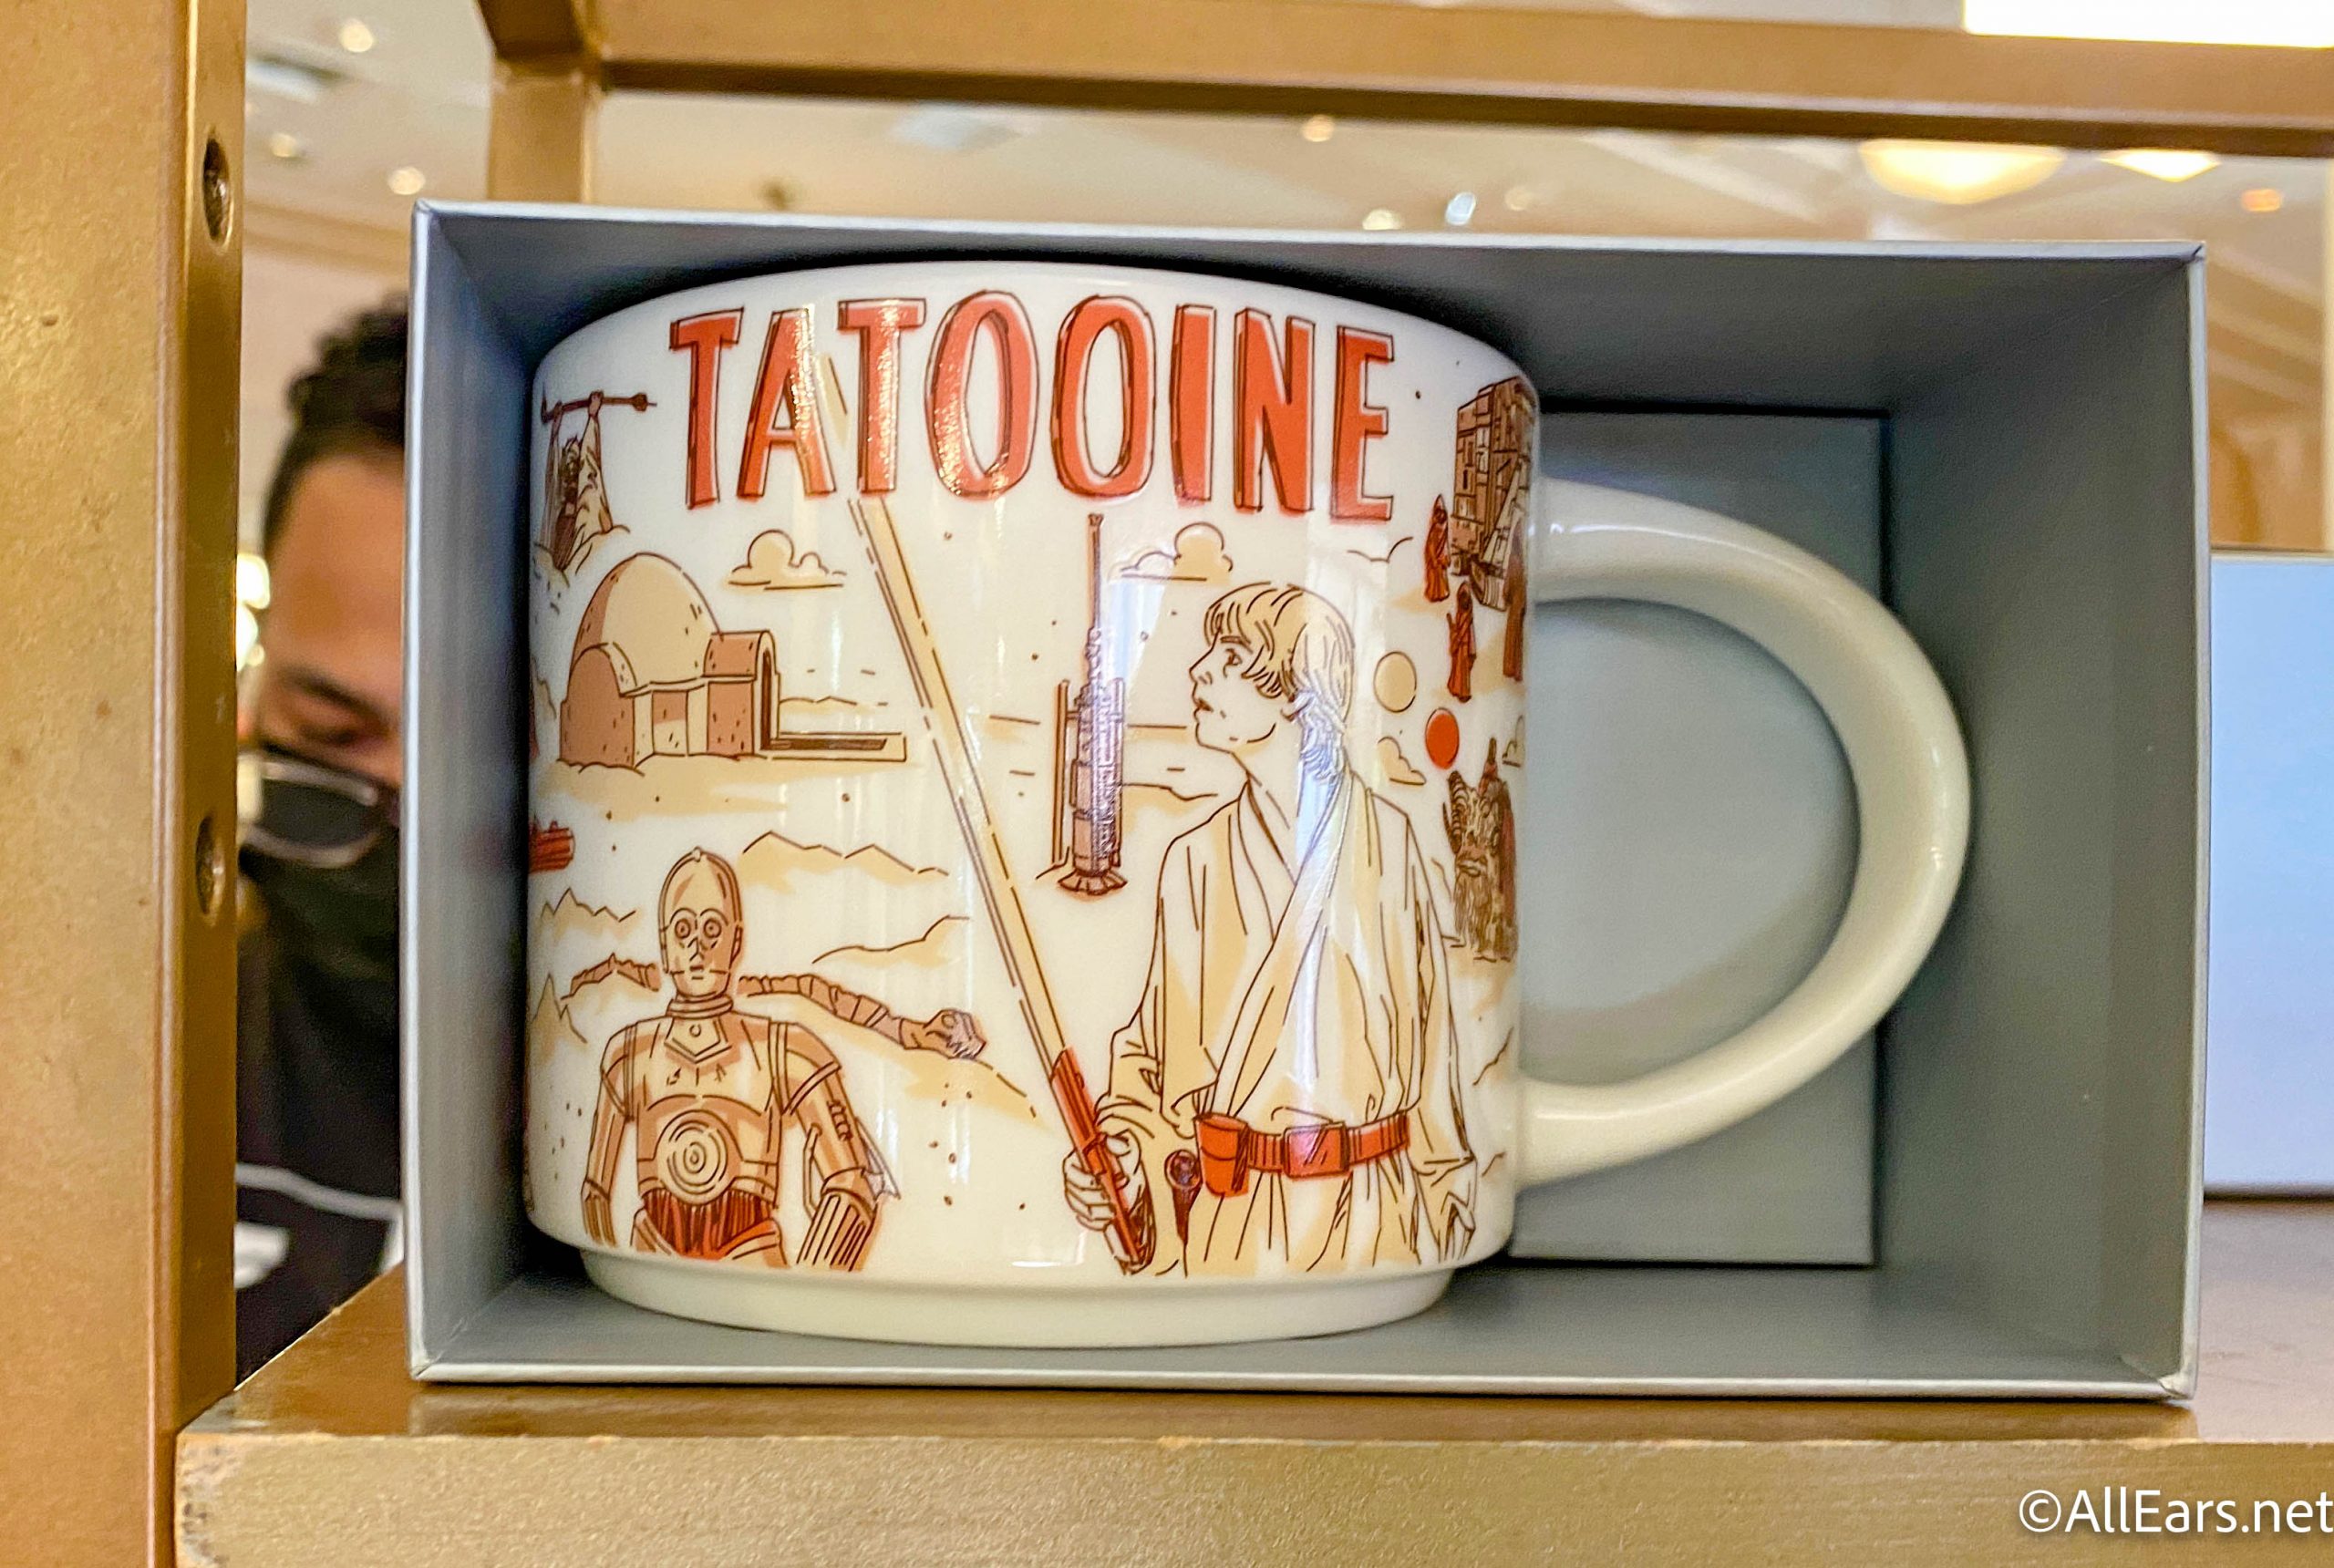 Starbucks Star Wars Mugs Are Available Online Again! See Them, You